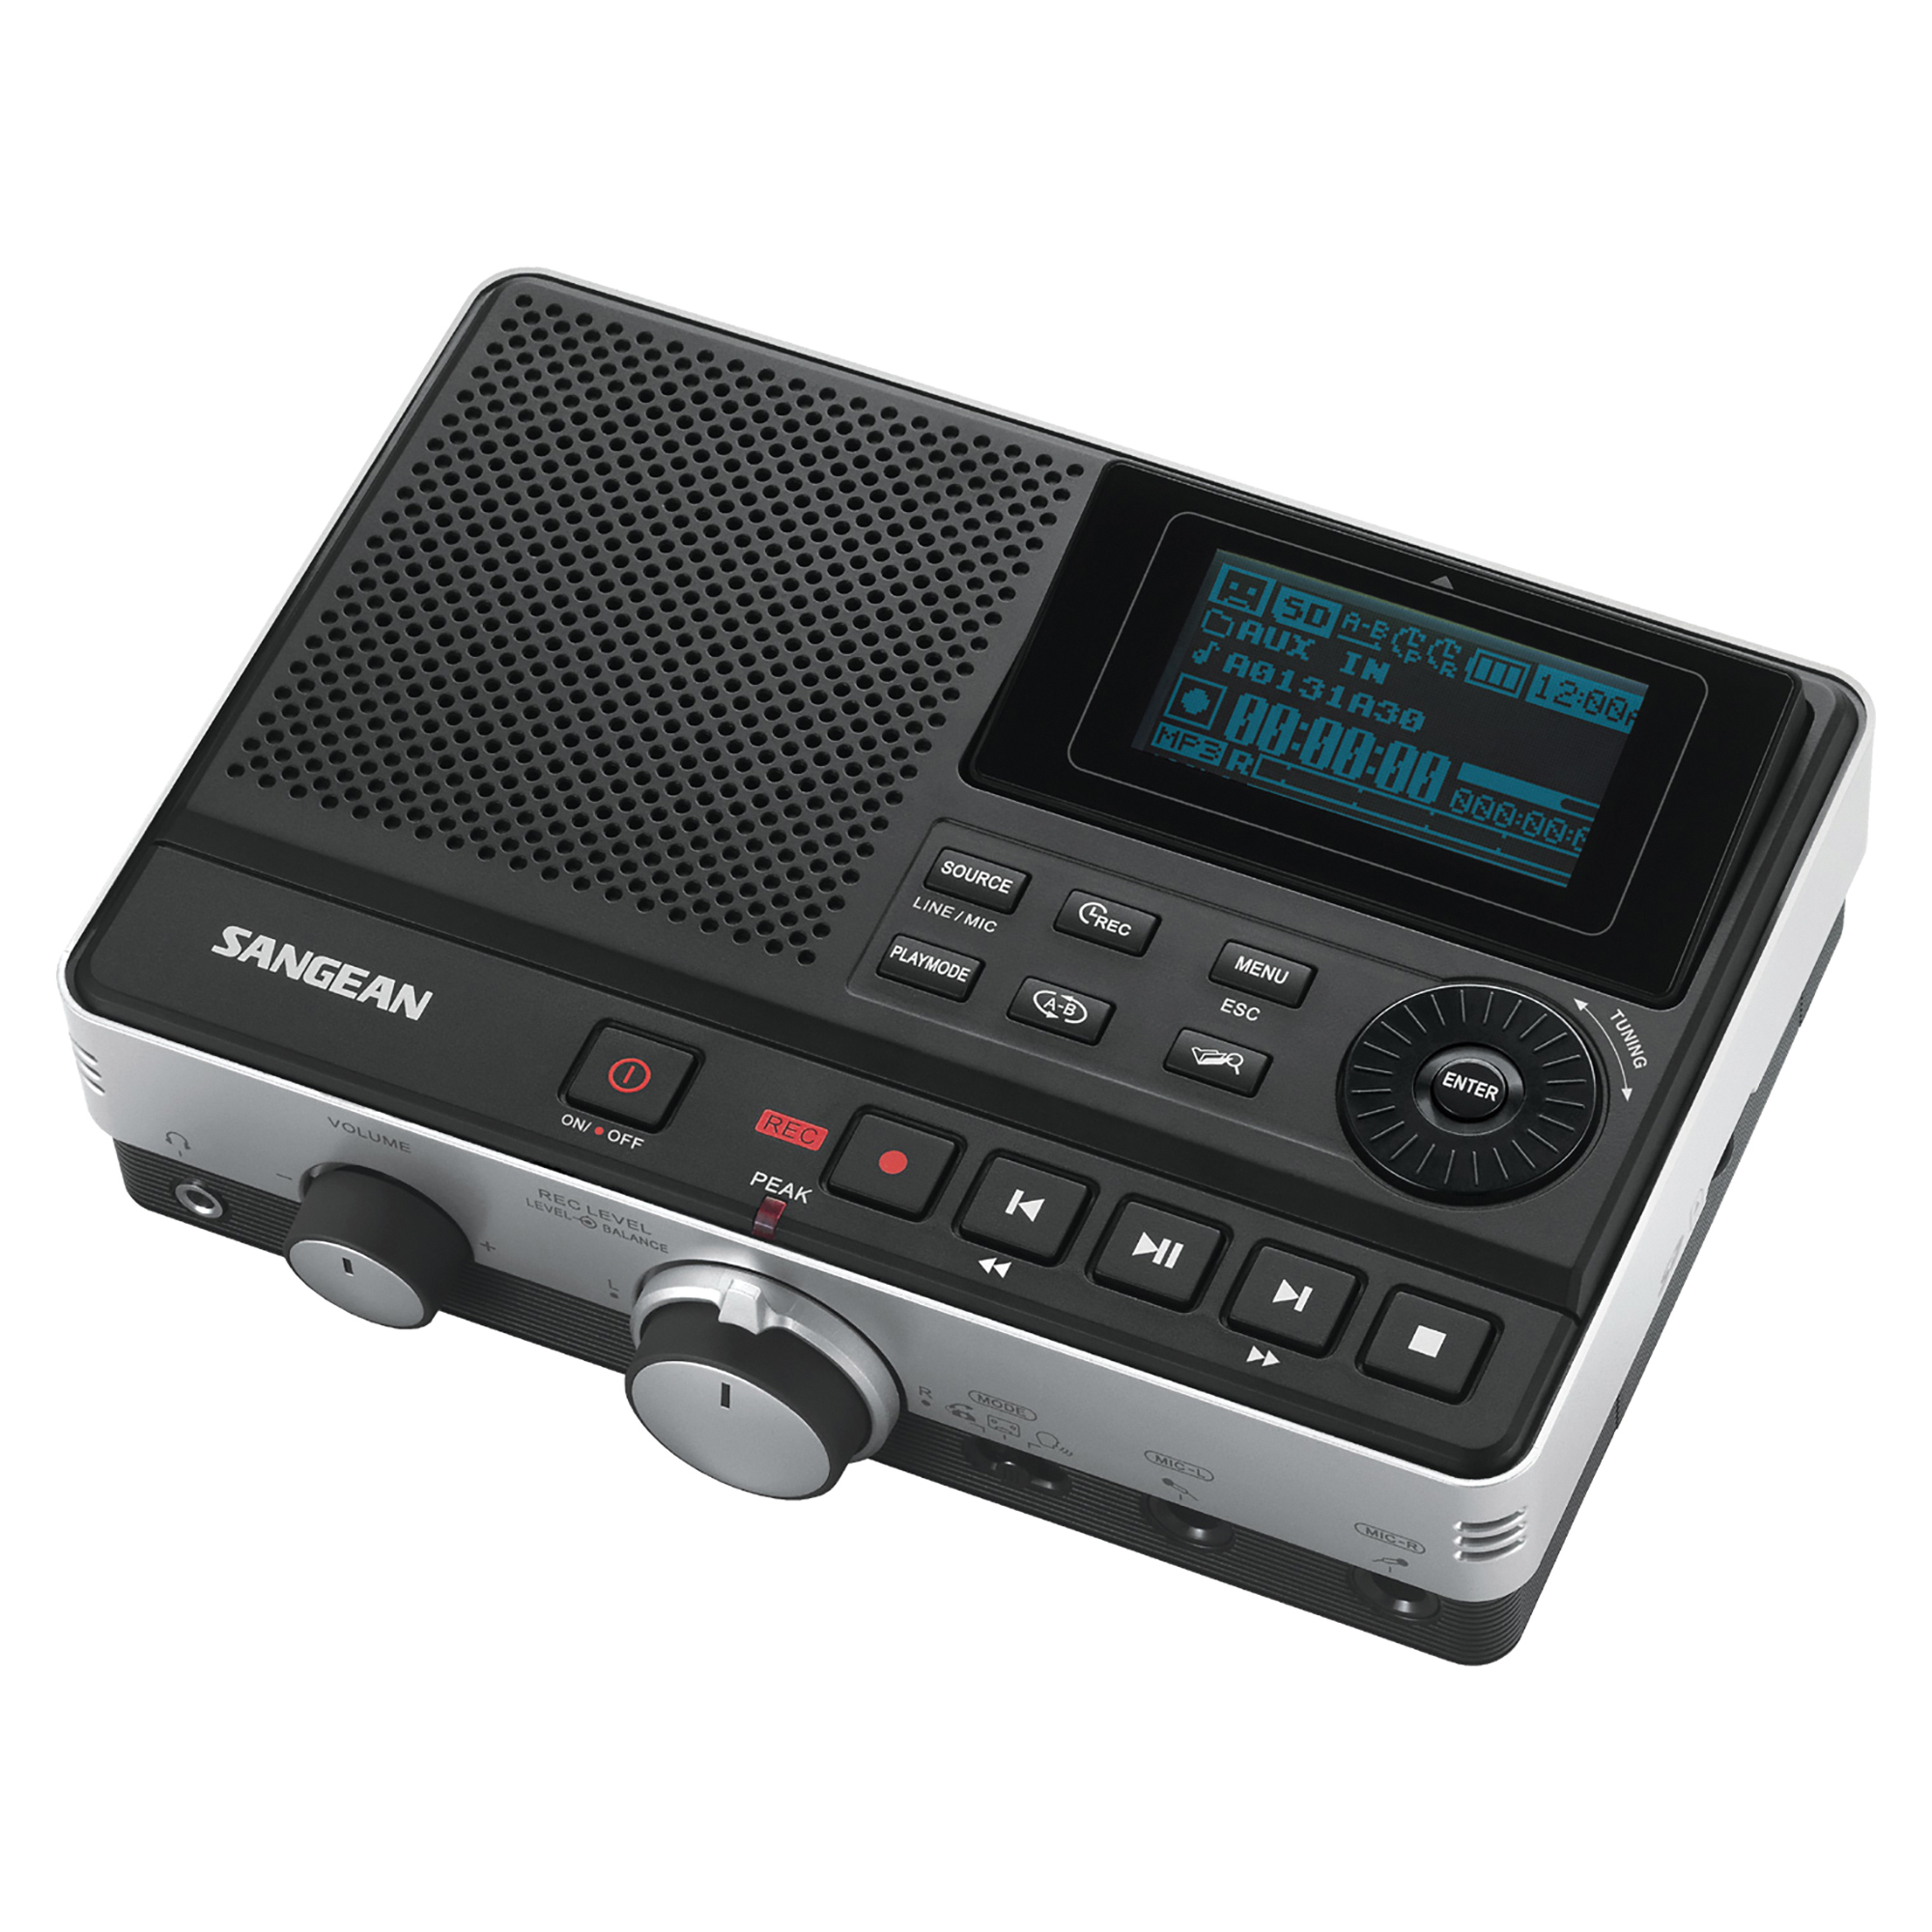 Sangean, Rechargeable Digital MP3 Recorder with Microphone, Model DAR-101